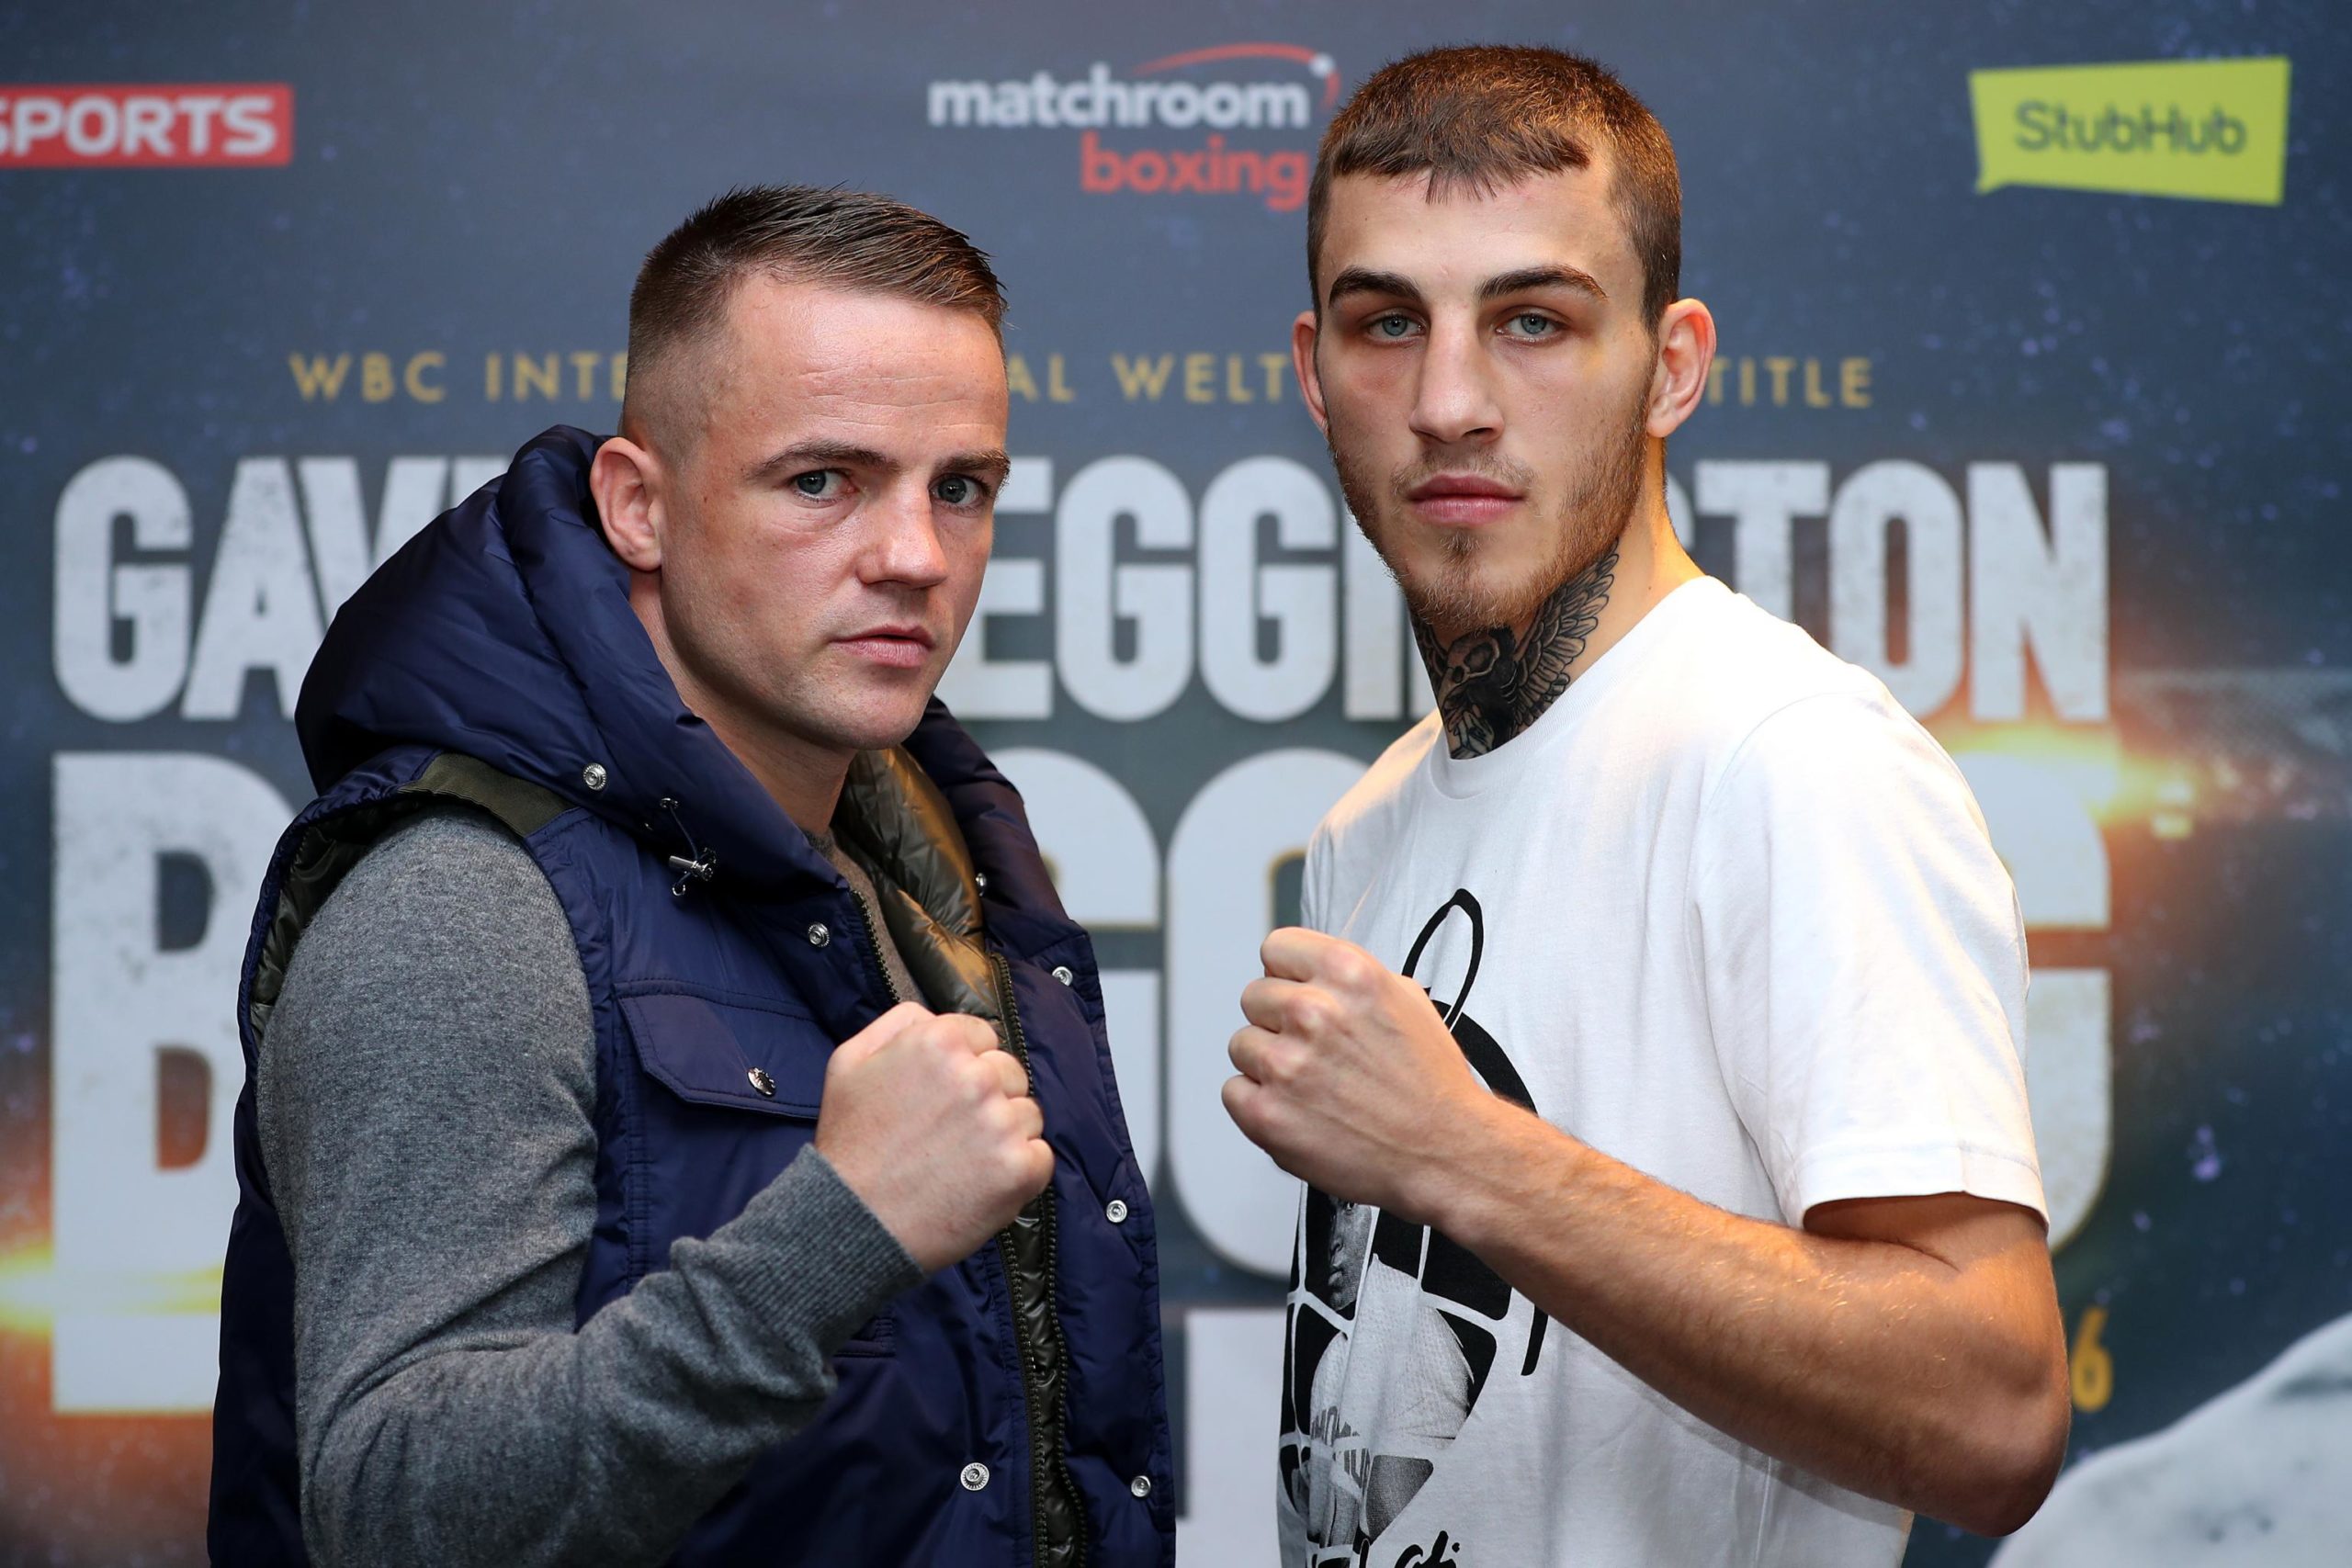 Sam Eggington Hungry To Win World Title Fight in 2022!